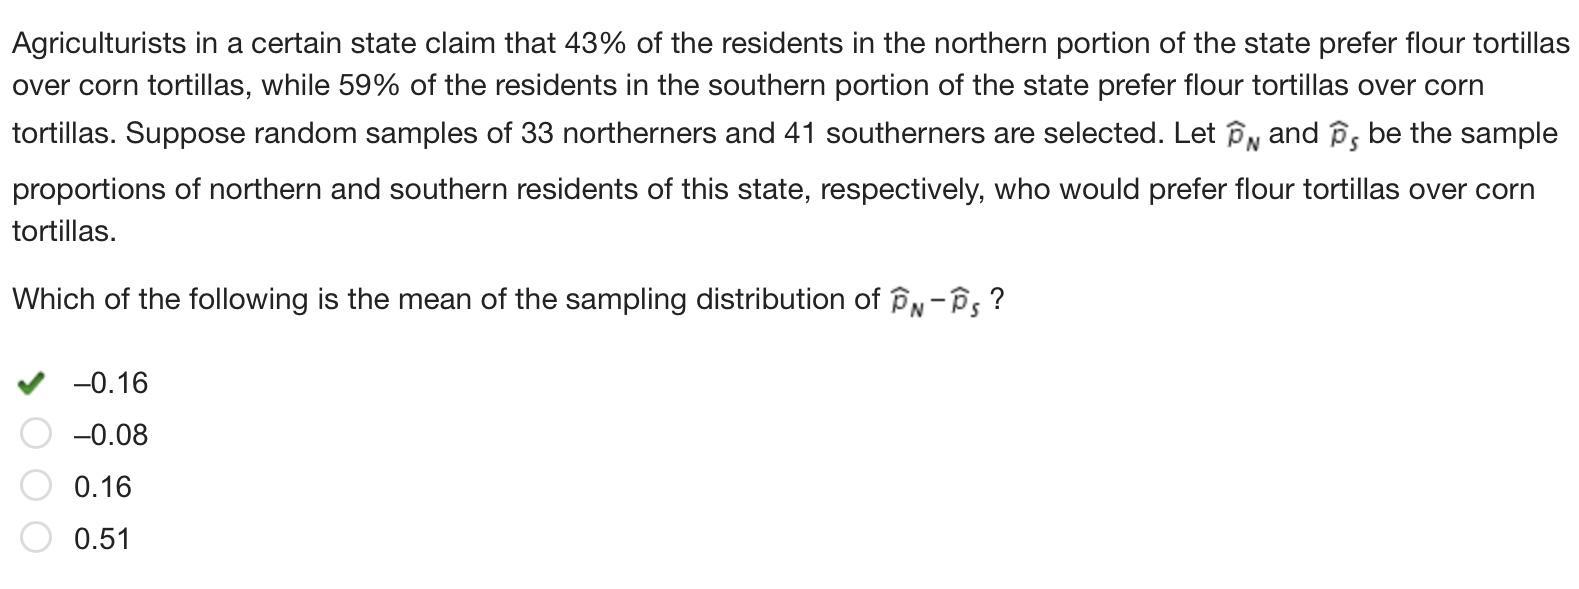 Agriculturists In A Certain State Claim That 43% Of The Residents In The Northern Portion Of The State